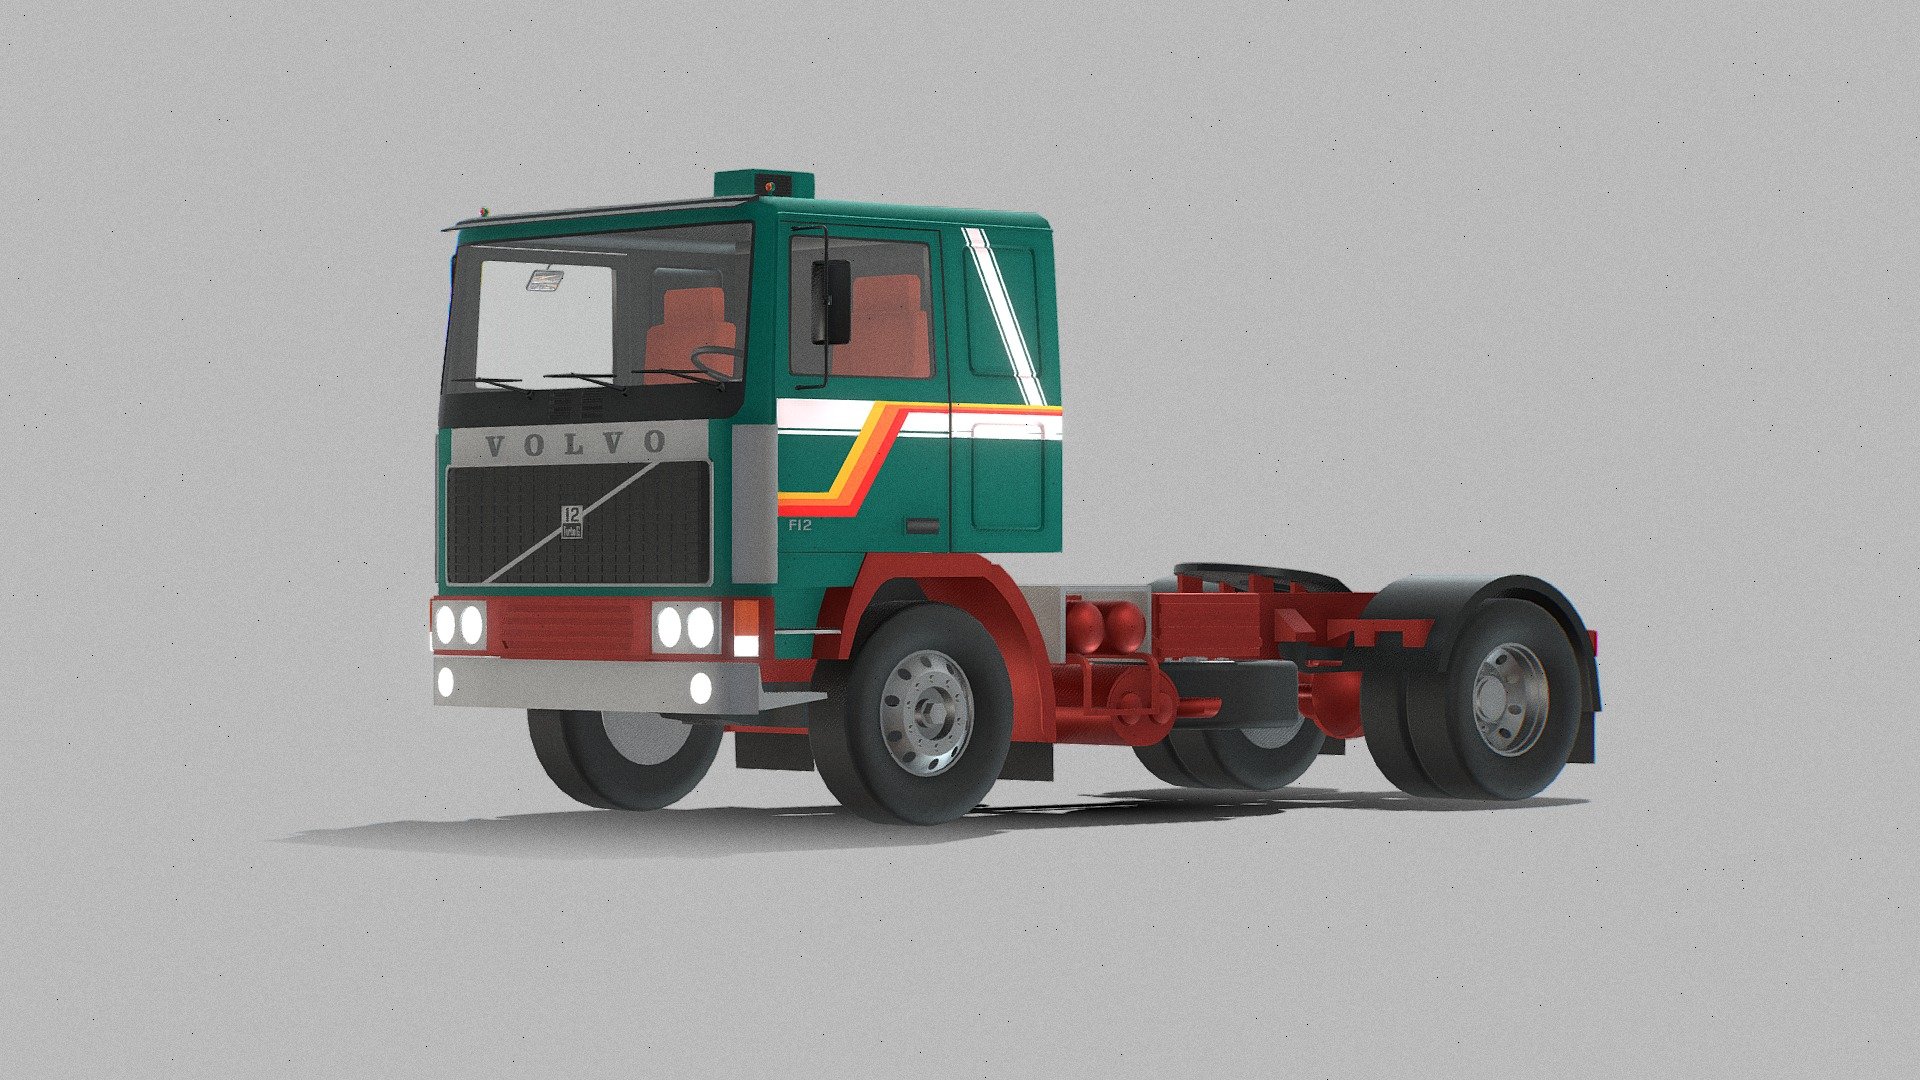 Please feel free to use this model in your projects! I would be grateful for any attribution and likes.

Support me ko-fi.com/kekis69 Thanks! - Volvo F12 1977 Lowpoly - Download Free 3D model by kekis69 3d model